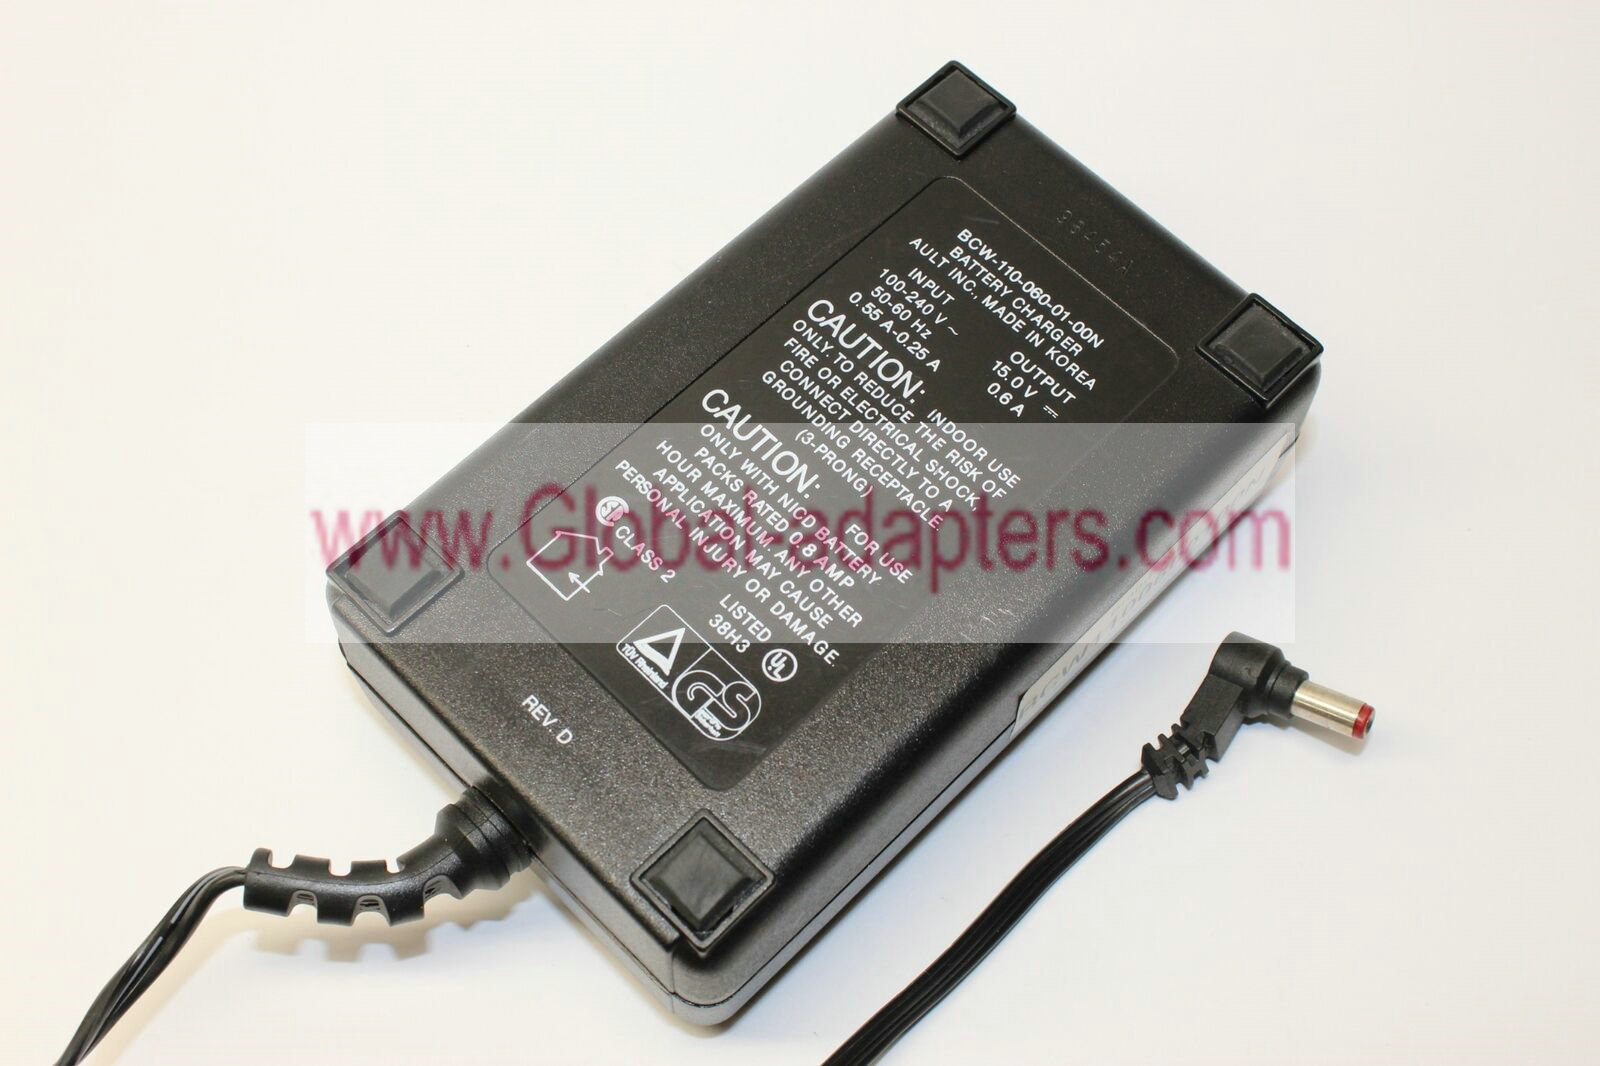 Ault BCW-110-080-01-00New Ault BCW-110-080-01-00N Battery Charger 15V 0.6A Power Supply Adapter